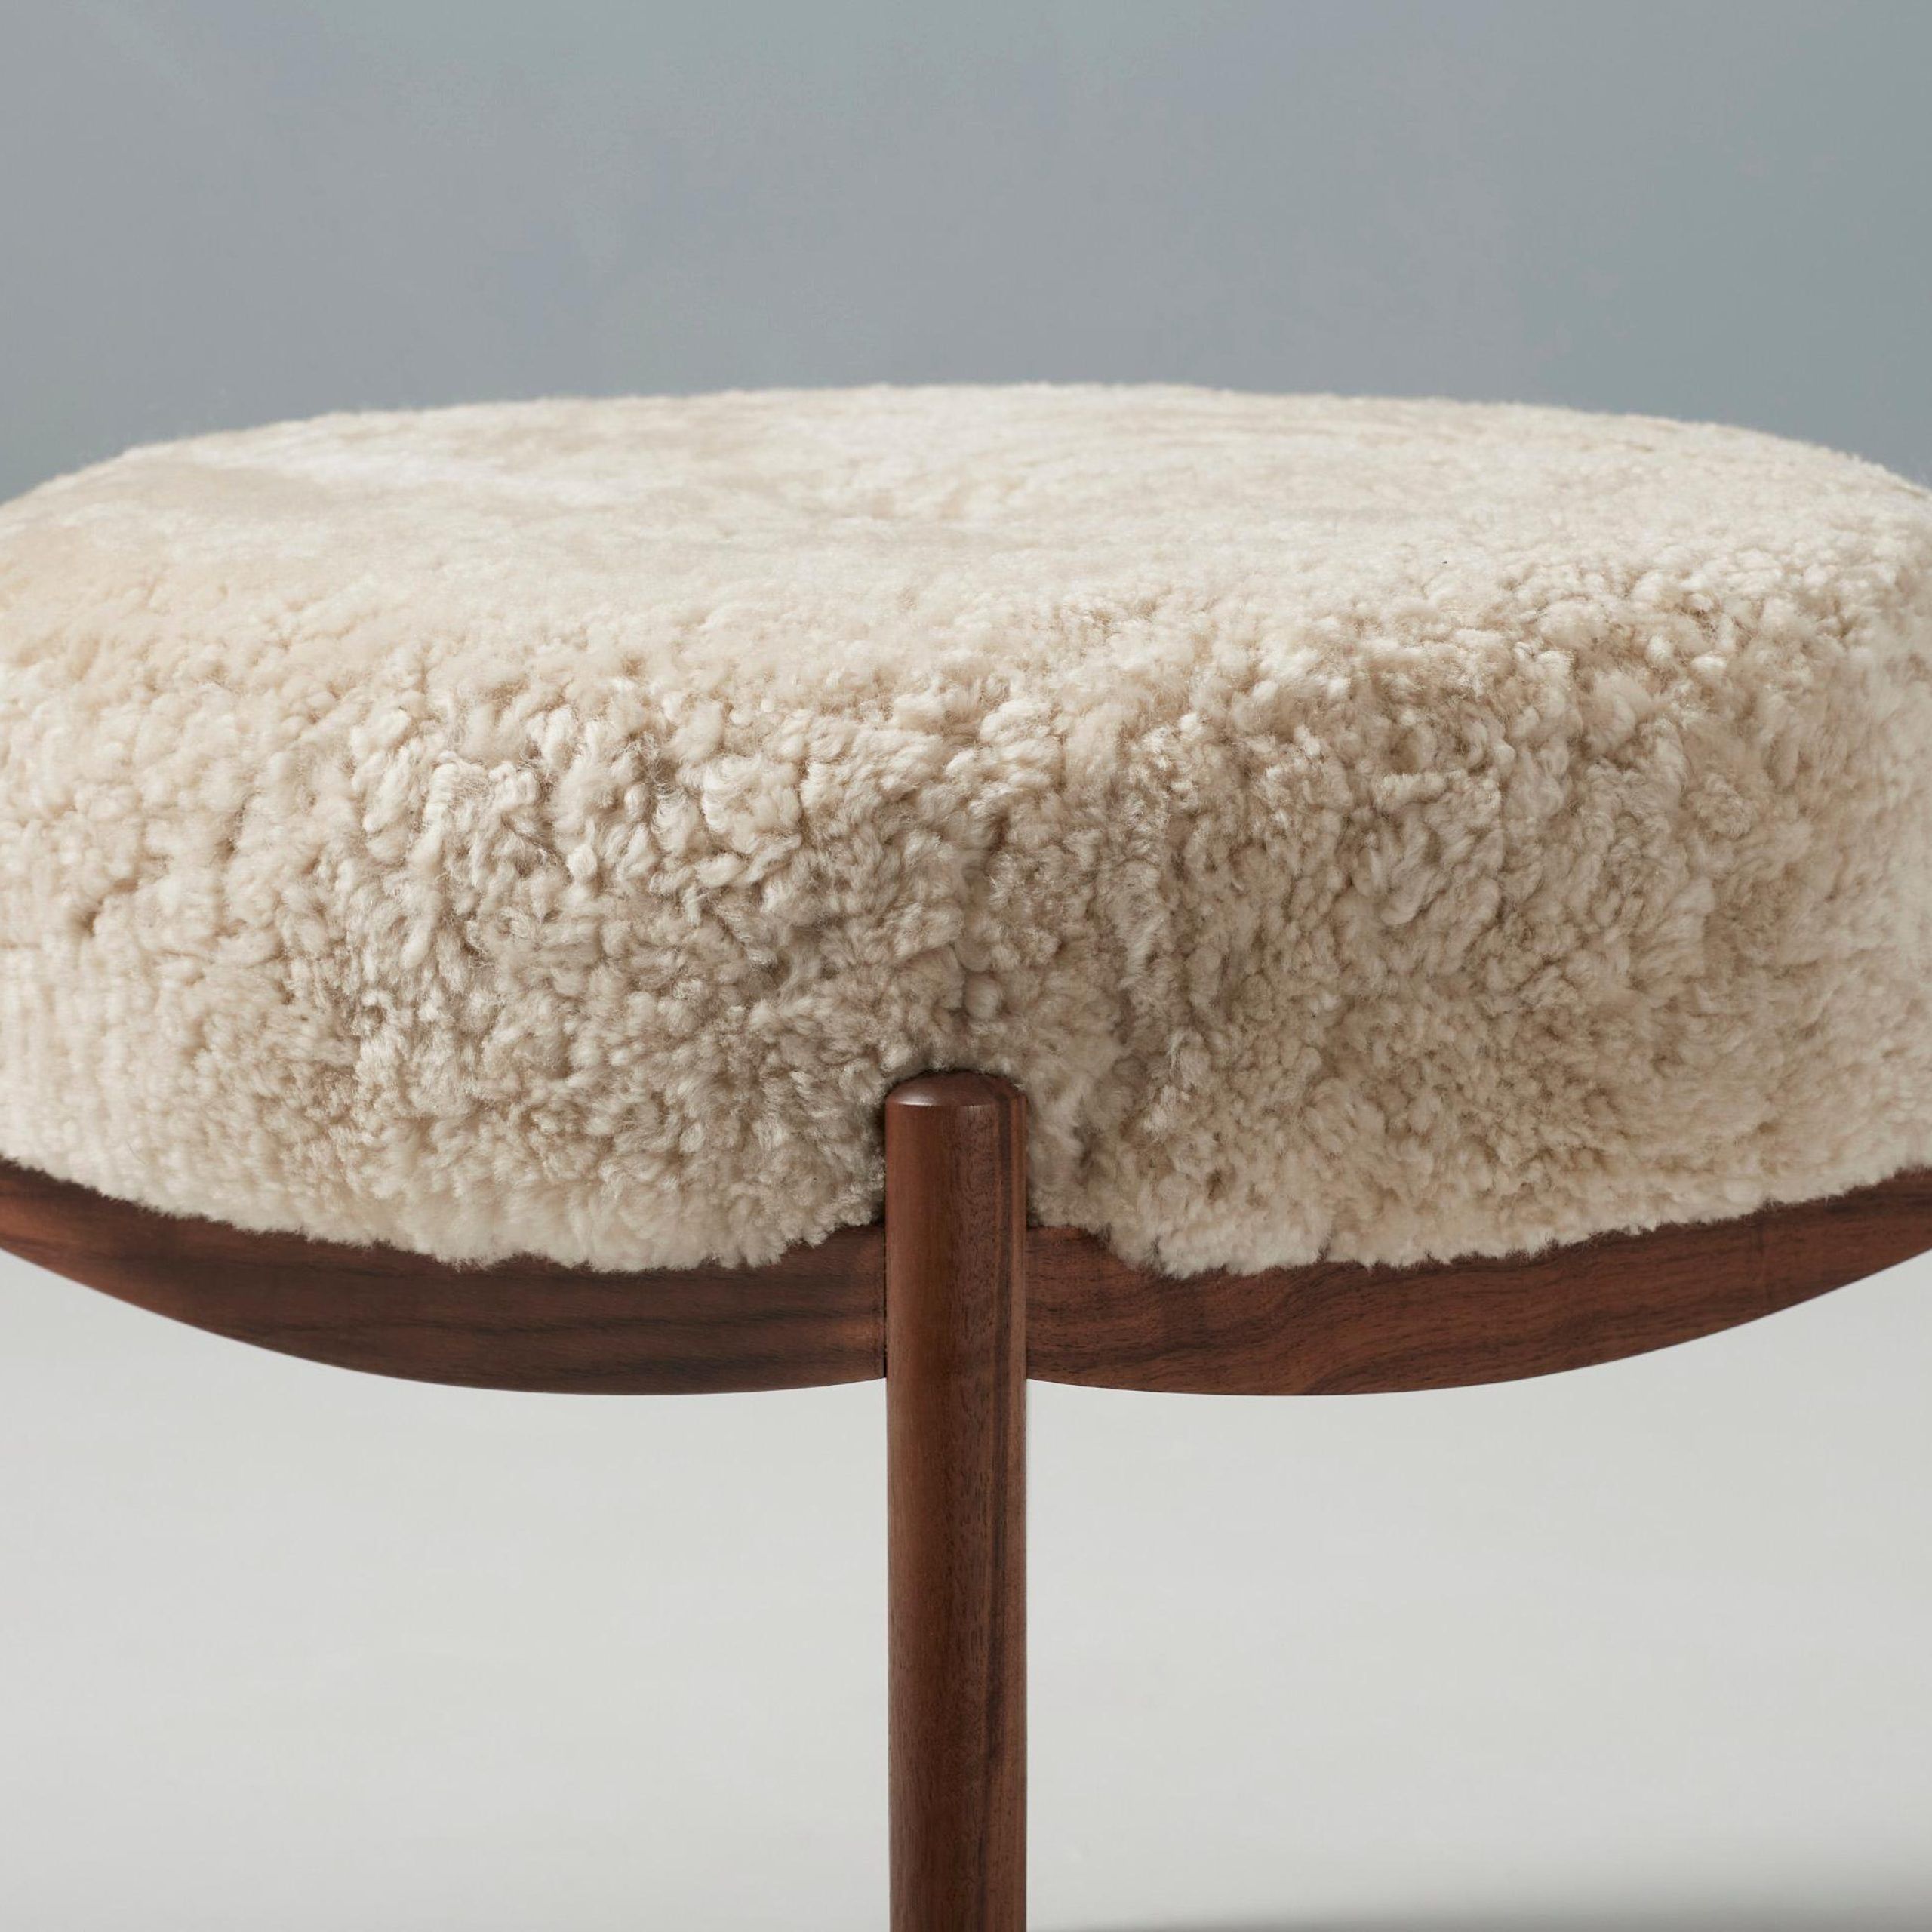 Most Recent Custom Made Walnut And Shearling Round Ottoman For Sale At 1stdibs Regarding Walnut Round Ottomans (View 13 of 15)